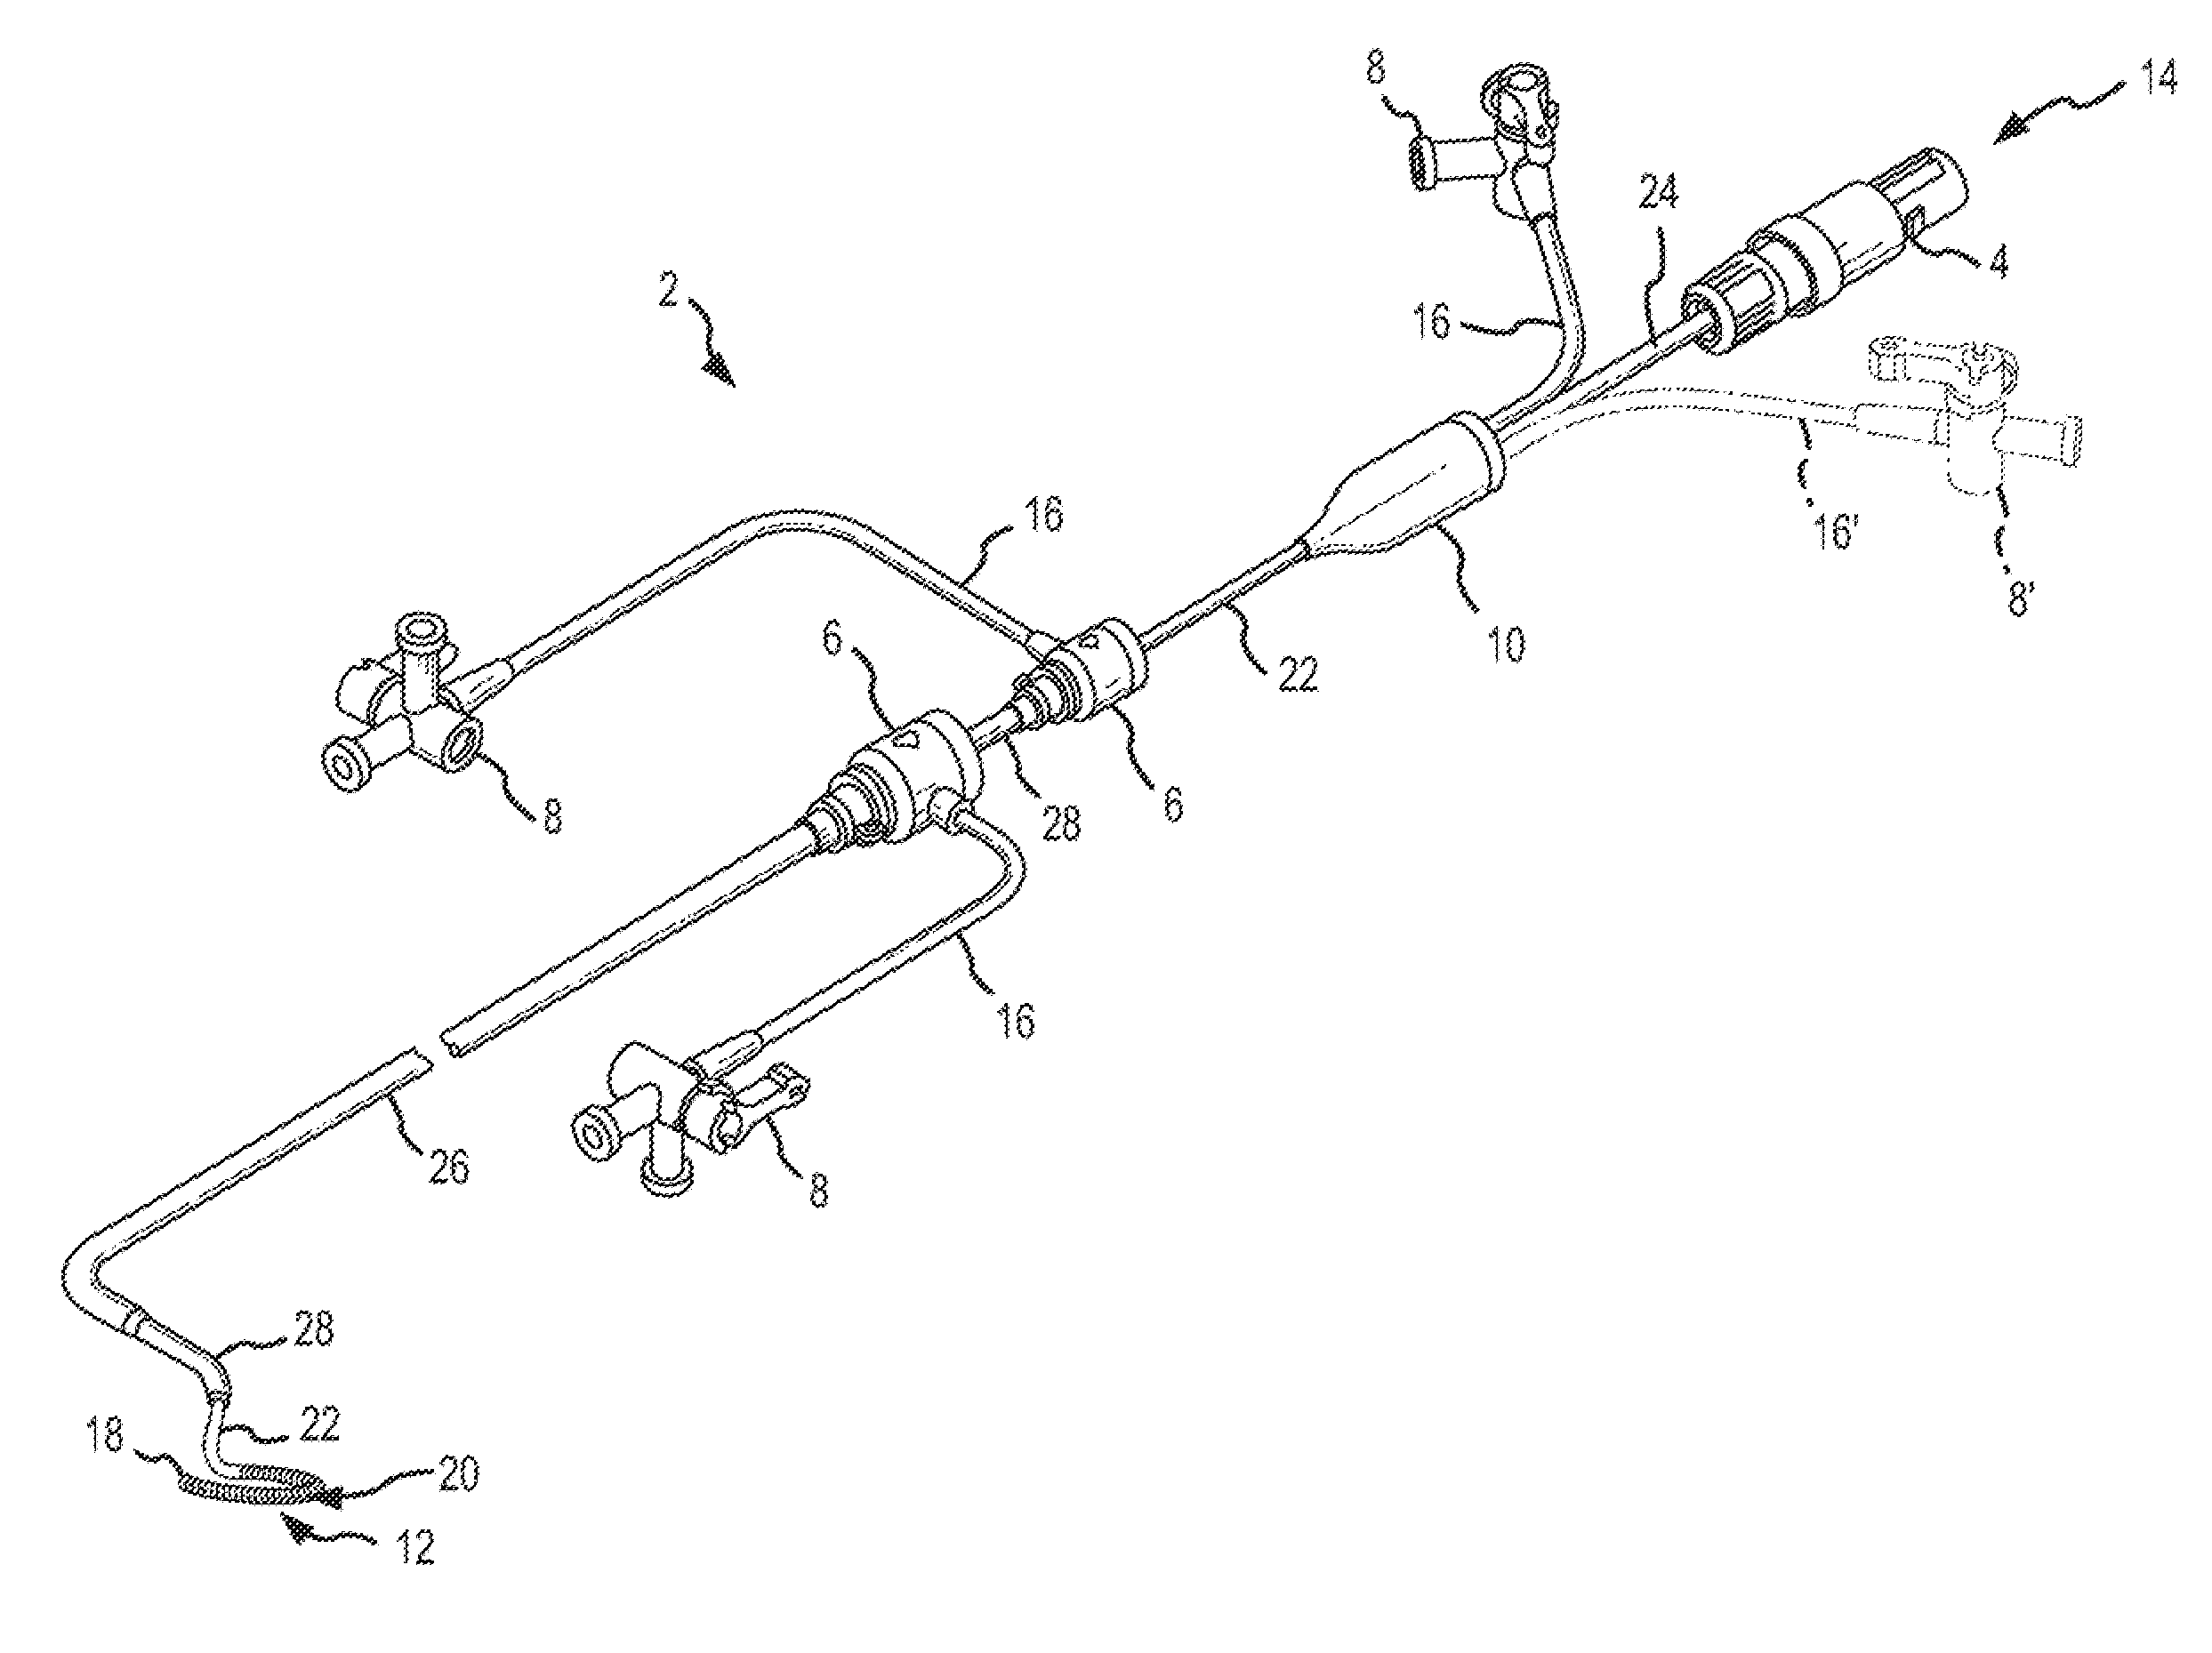 Ablation Catheter With Sensor Array And Discrimination Circuit To Minimize Variation In Power Density